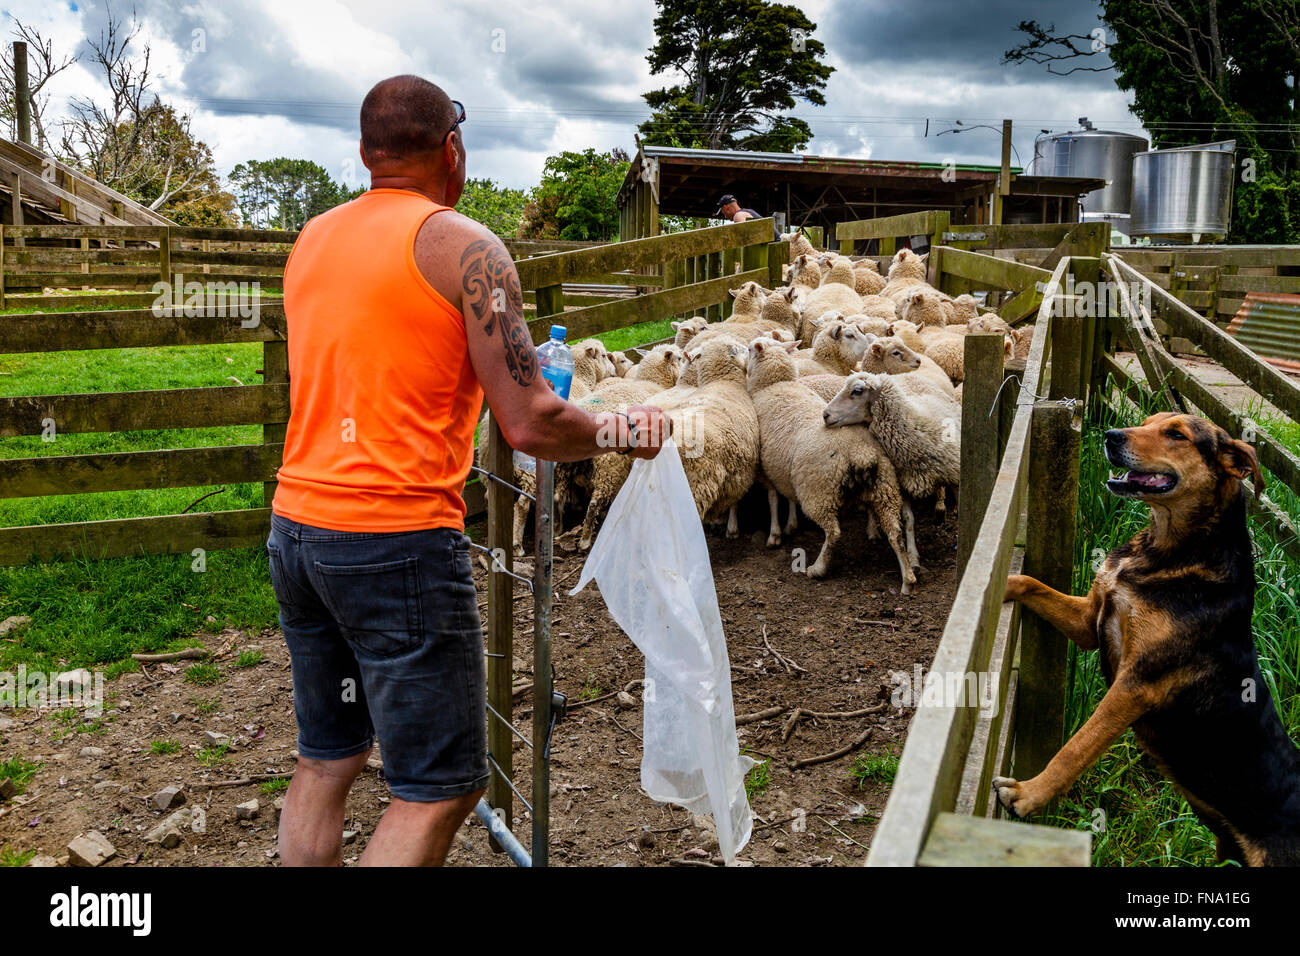 Sheep Are Moved Into A Sheep Pen In Readiness To Be Sold, Sheep Farm, Pukekohe, New Zealand Stock Photo